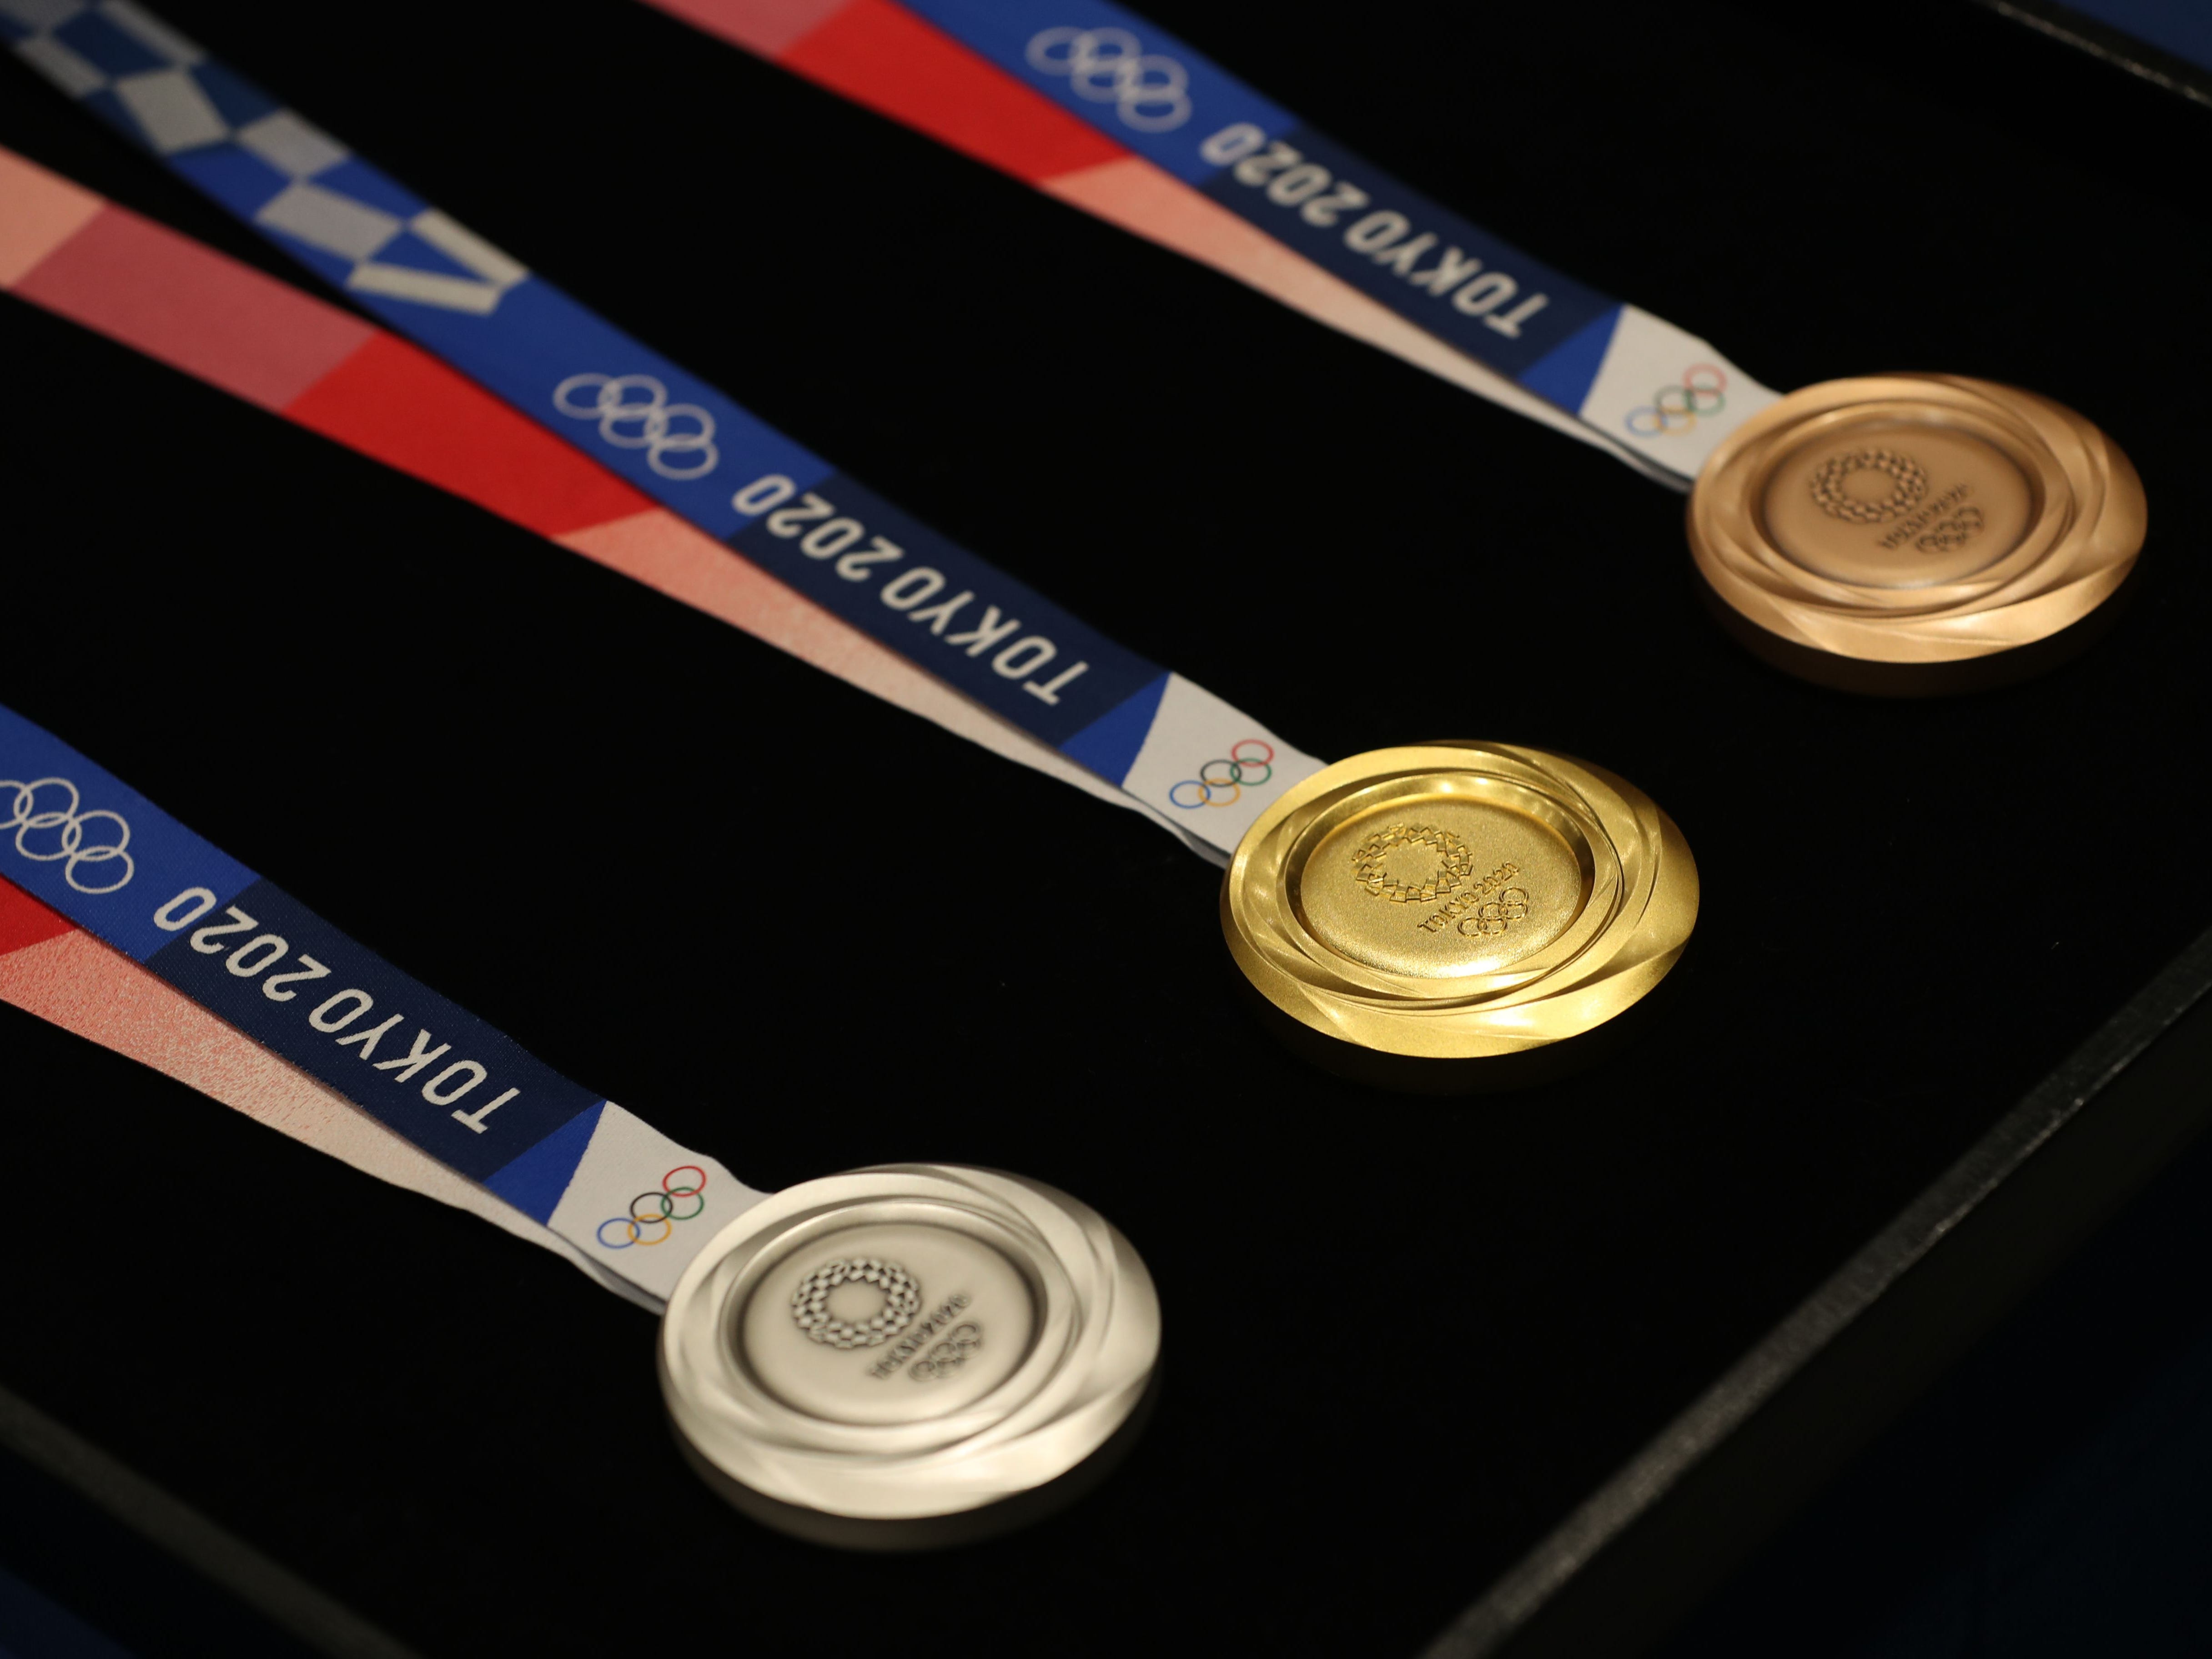 The three medals that will be awarded at the 2020 Summer Olympics.